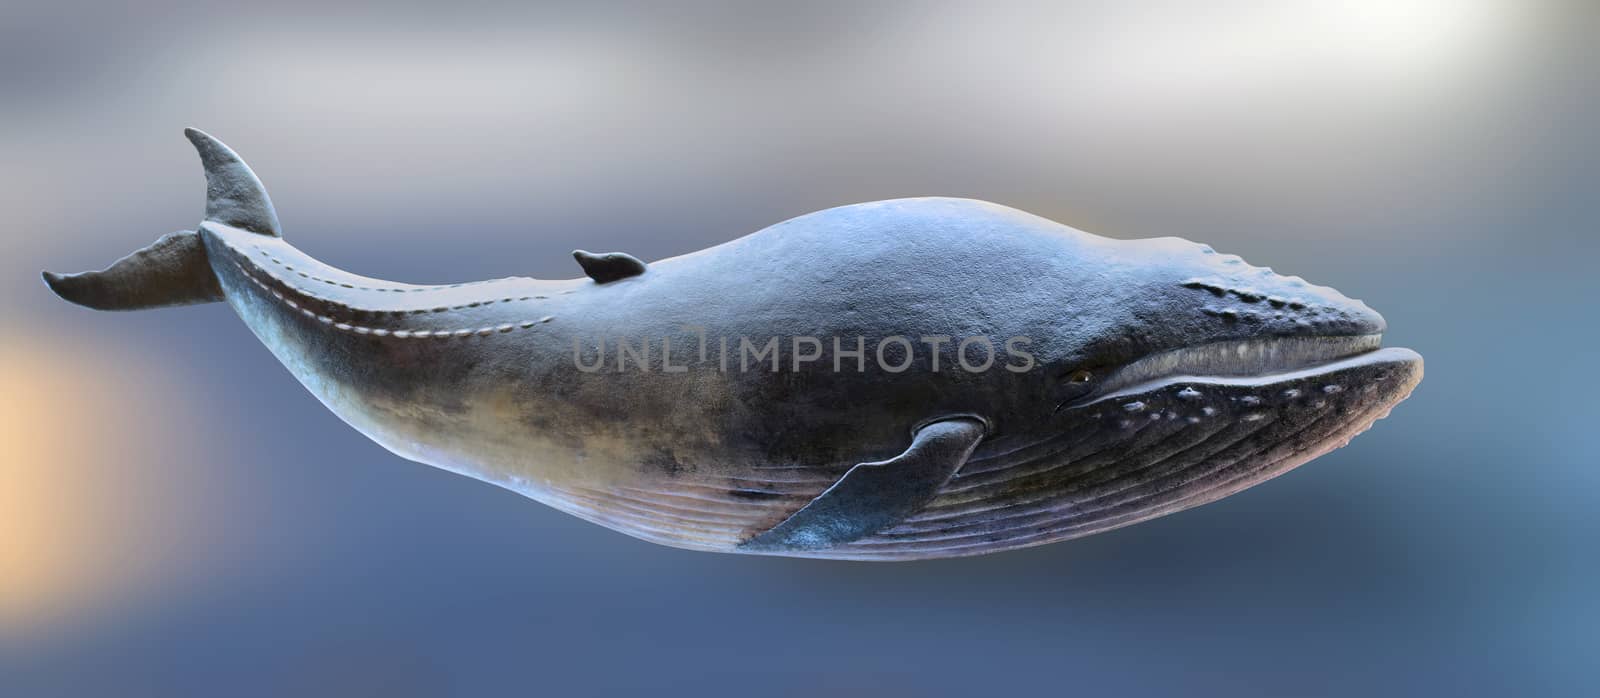 Whale model by Vectorex